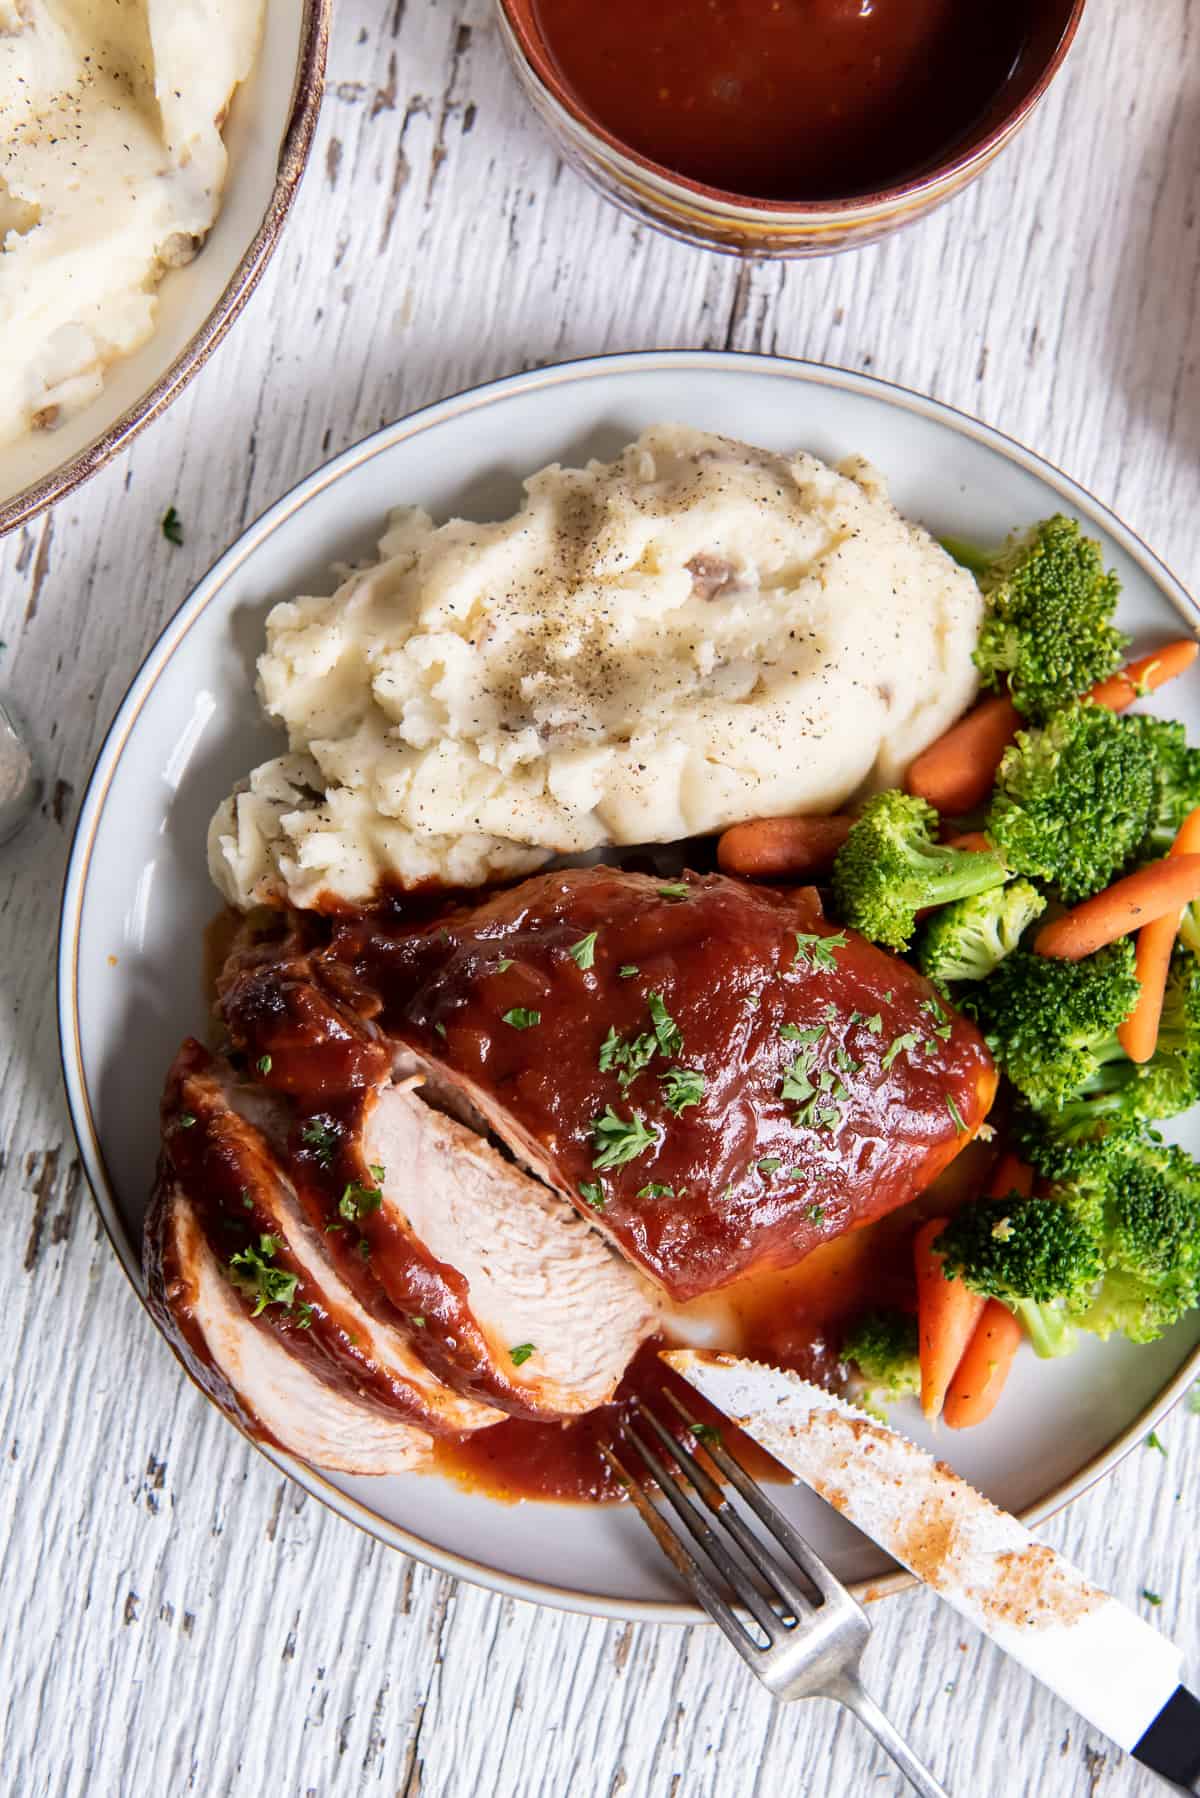 An over the top shot of sliced BBQ chicken on a plate with mashed potatoes and broccoli.